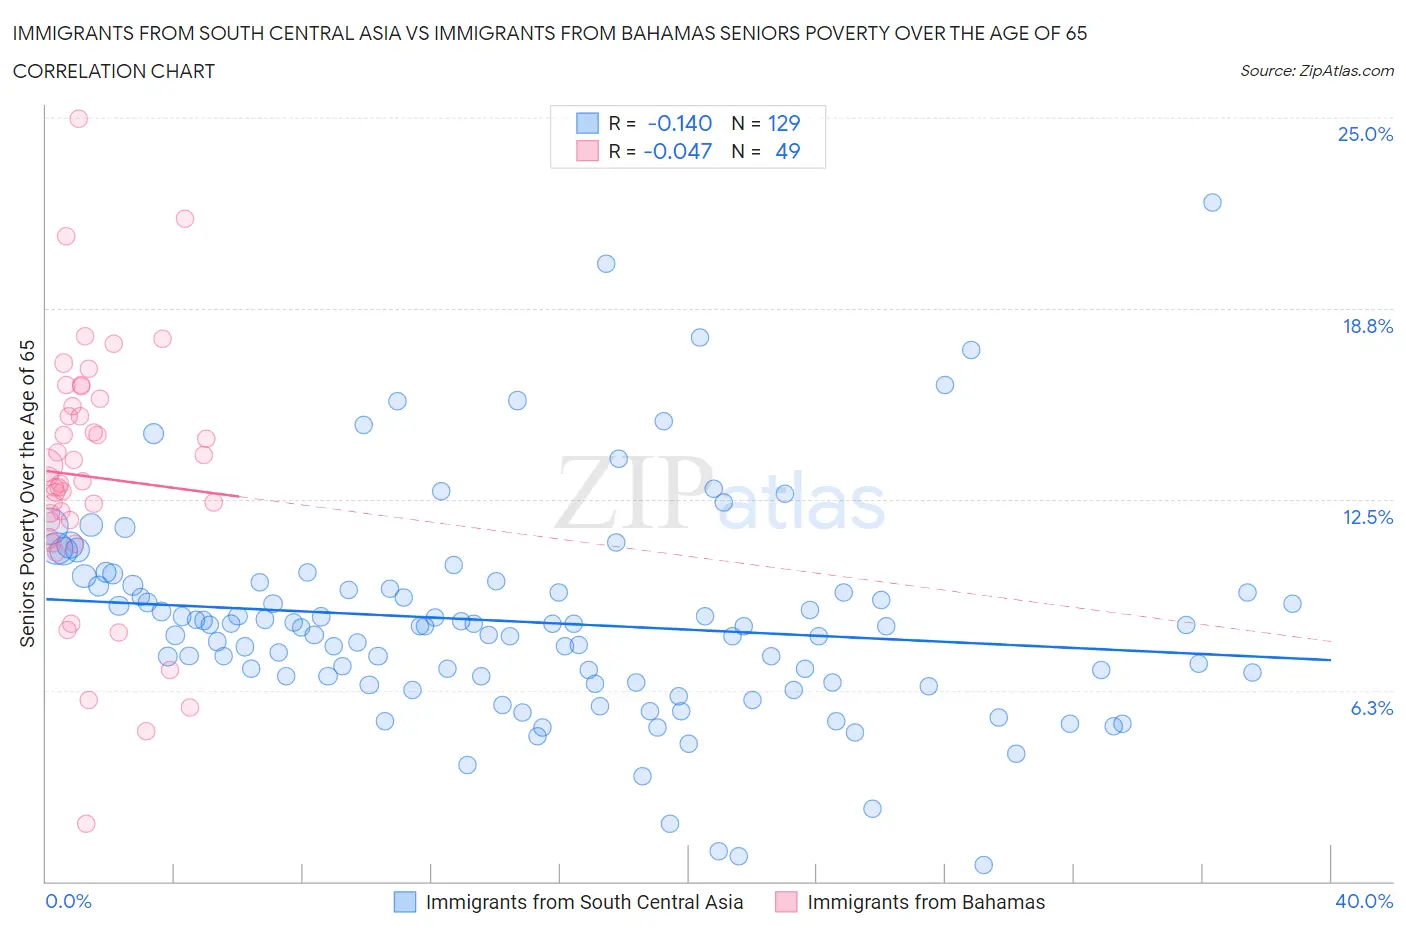 Immigrants from South Central Asia vs Immigrants from Bahamas Seniors Poverty Over the Age of 65